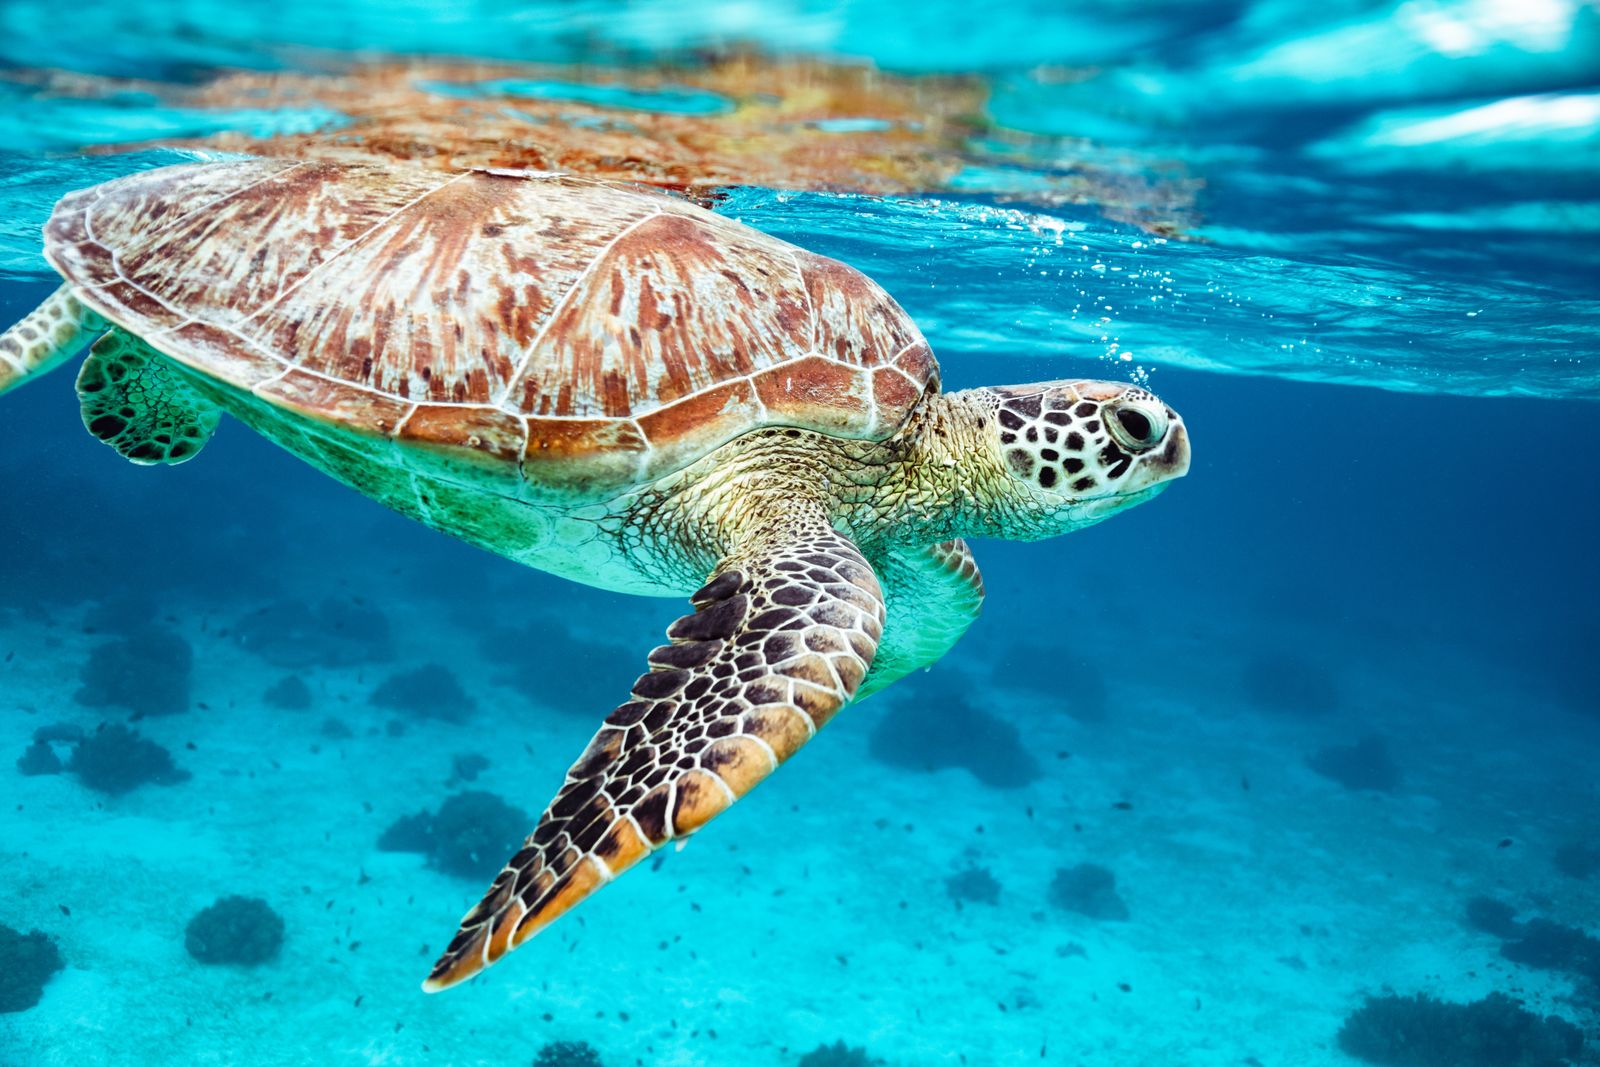 Metal Pollution May Be Making More Green Sea Turtles Female